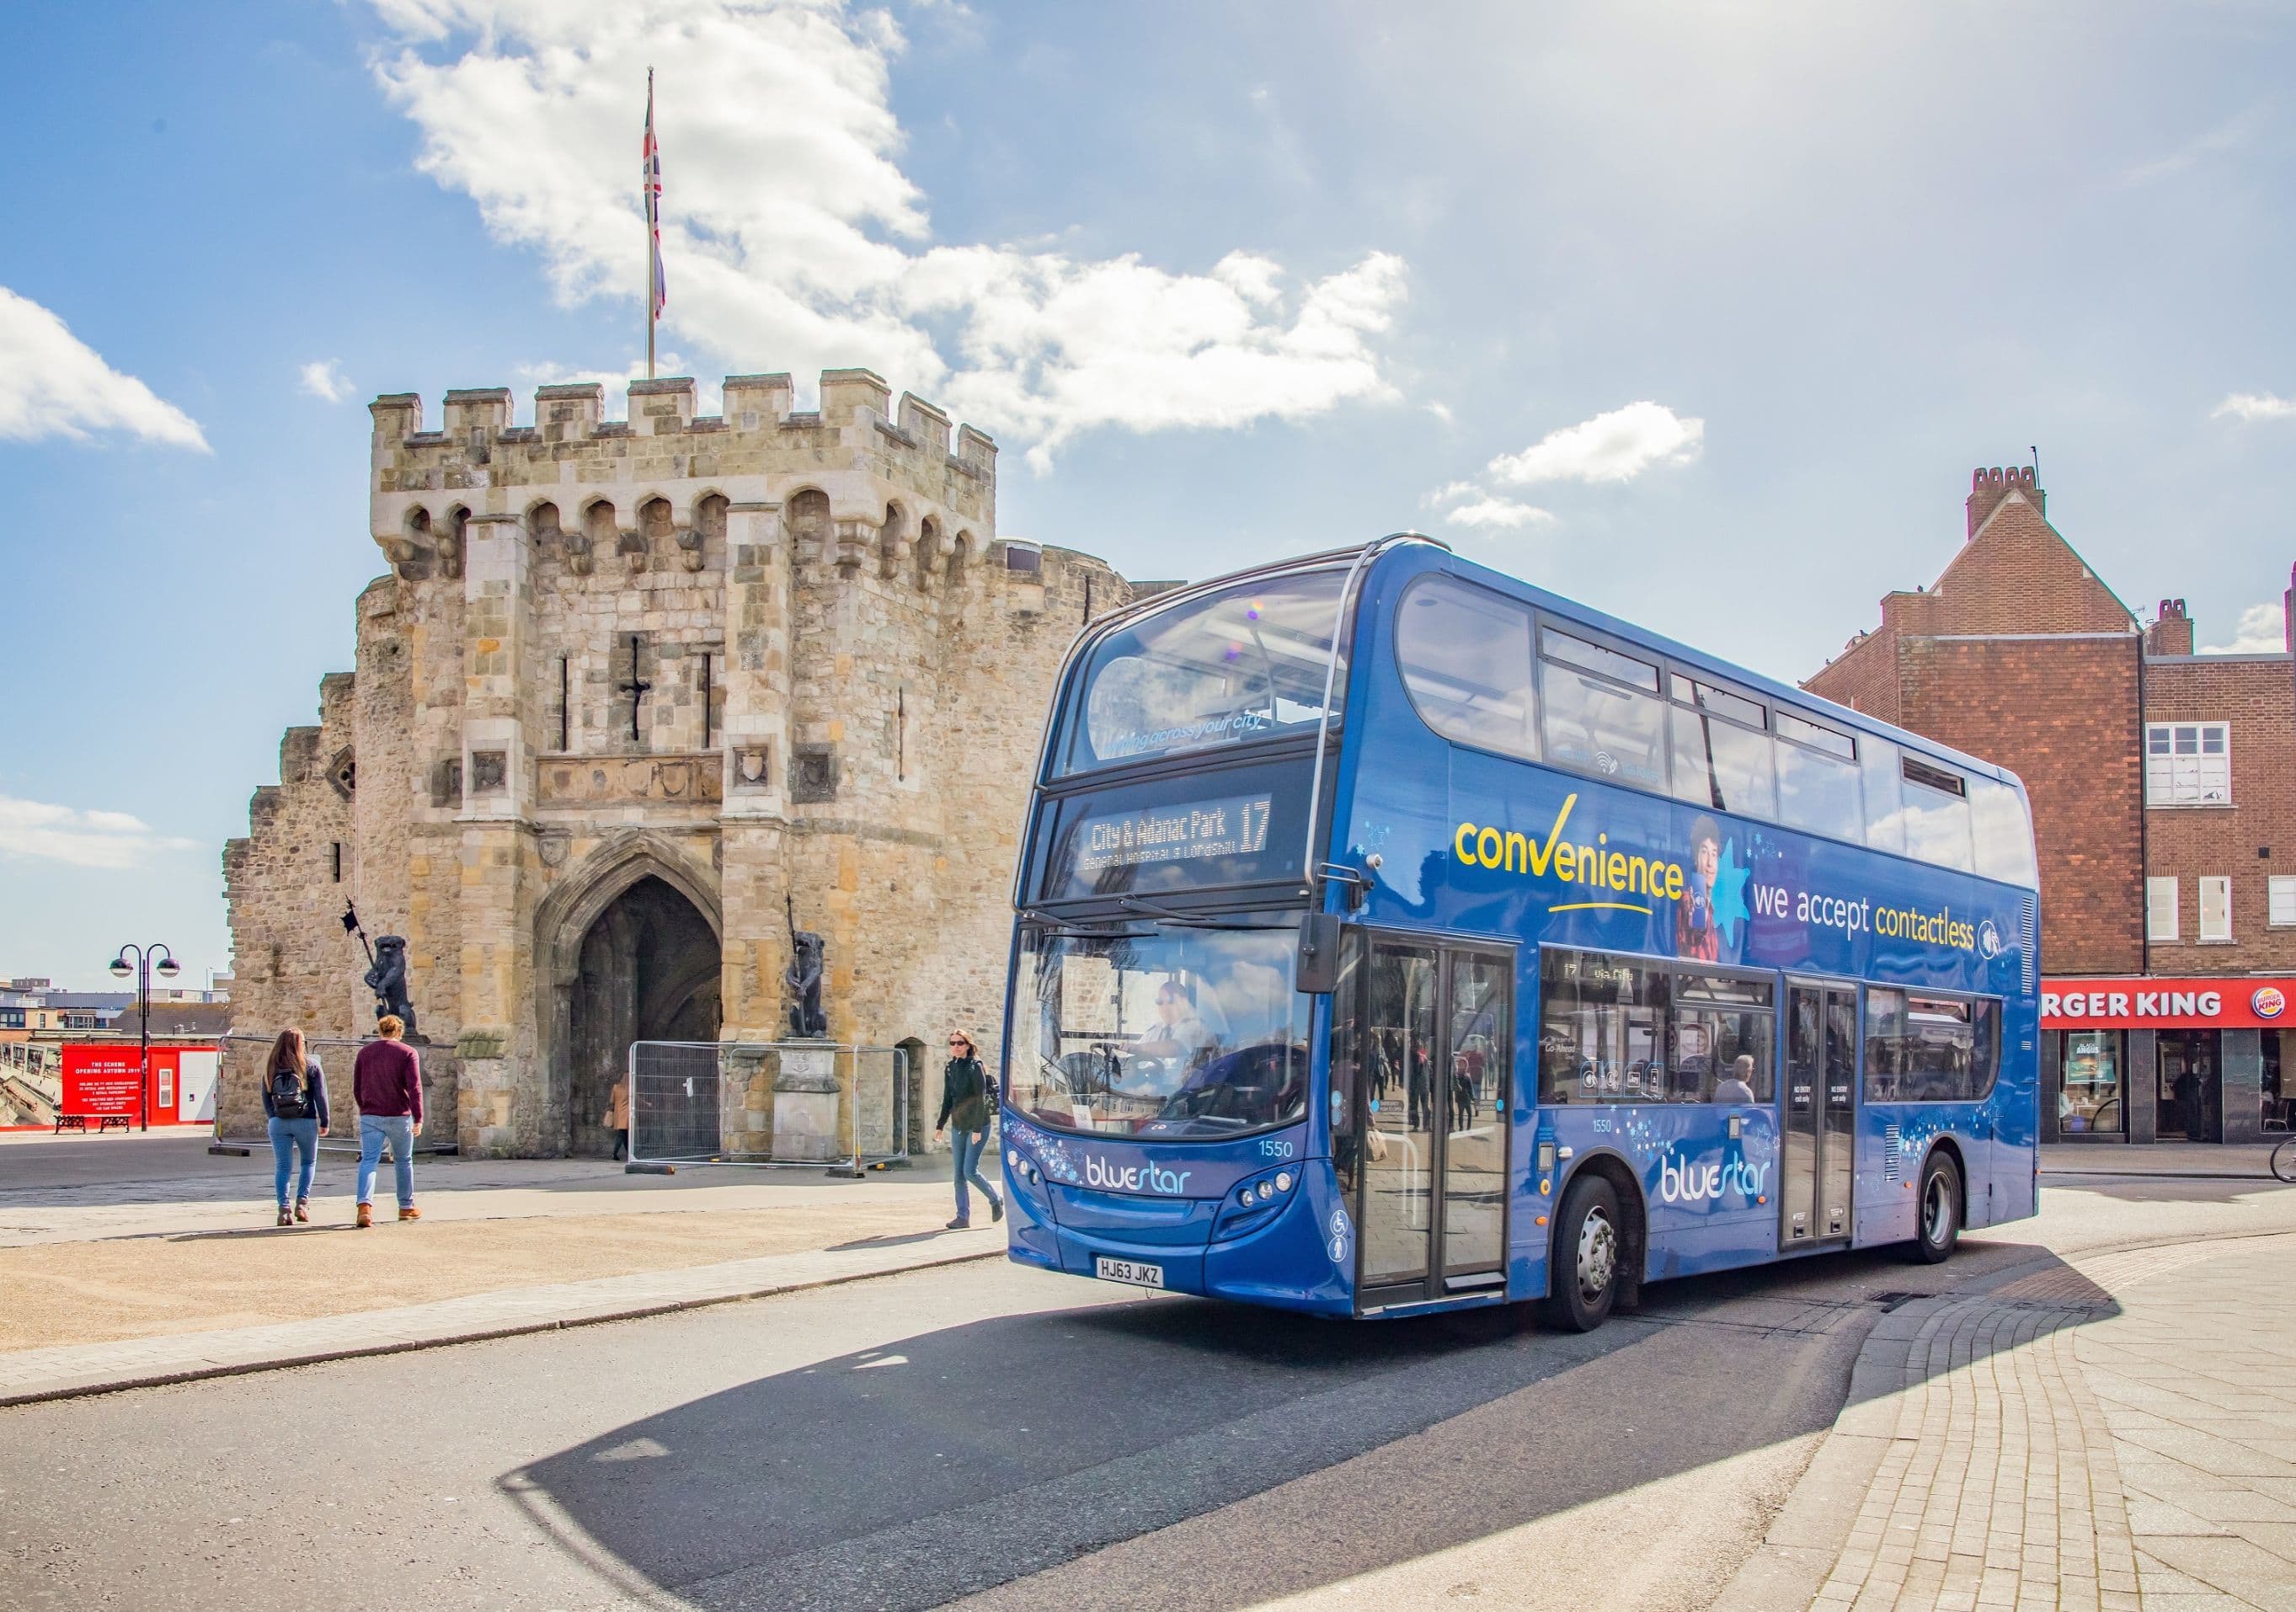 Travel by bus in Southampton and make the Bluestar Promise!